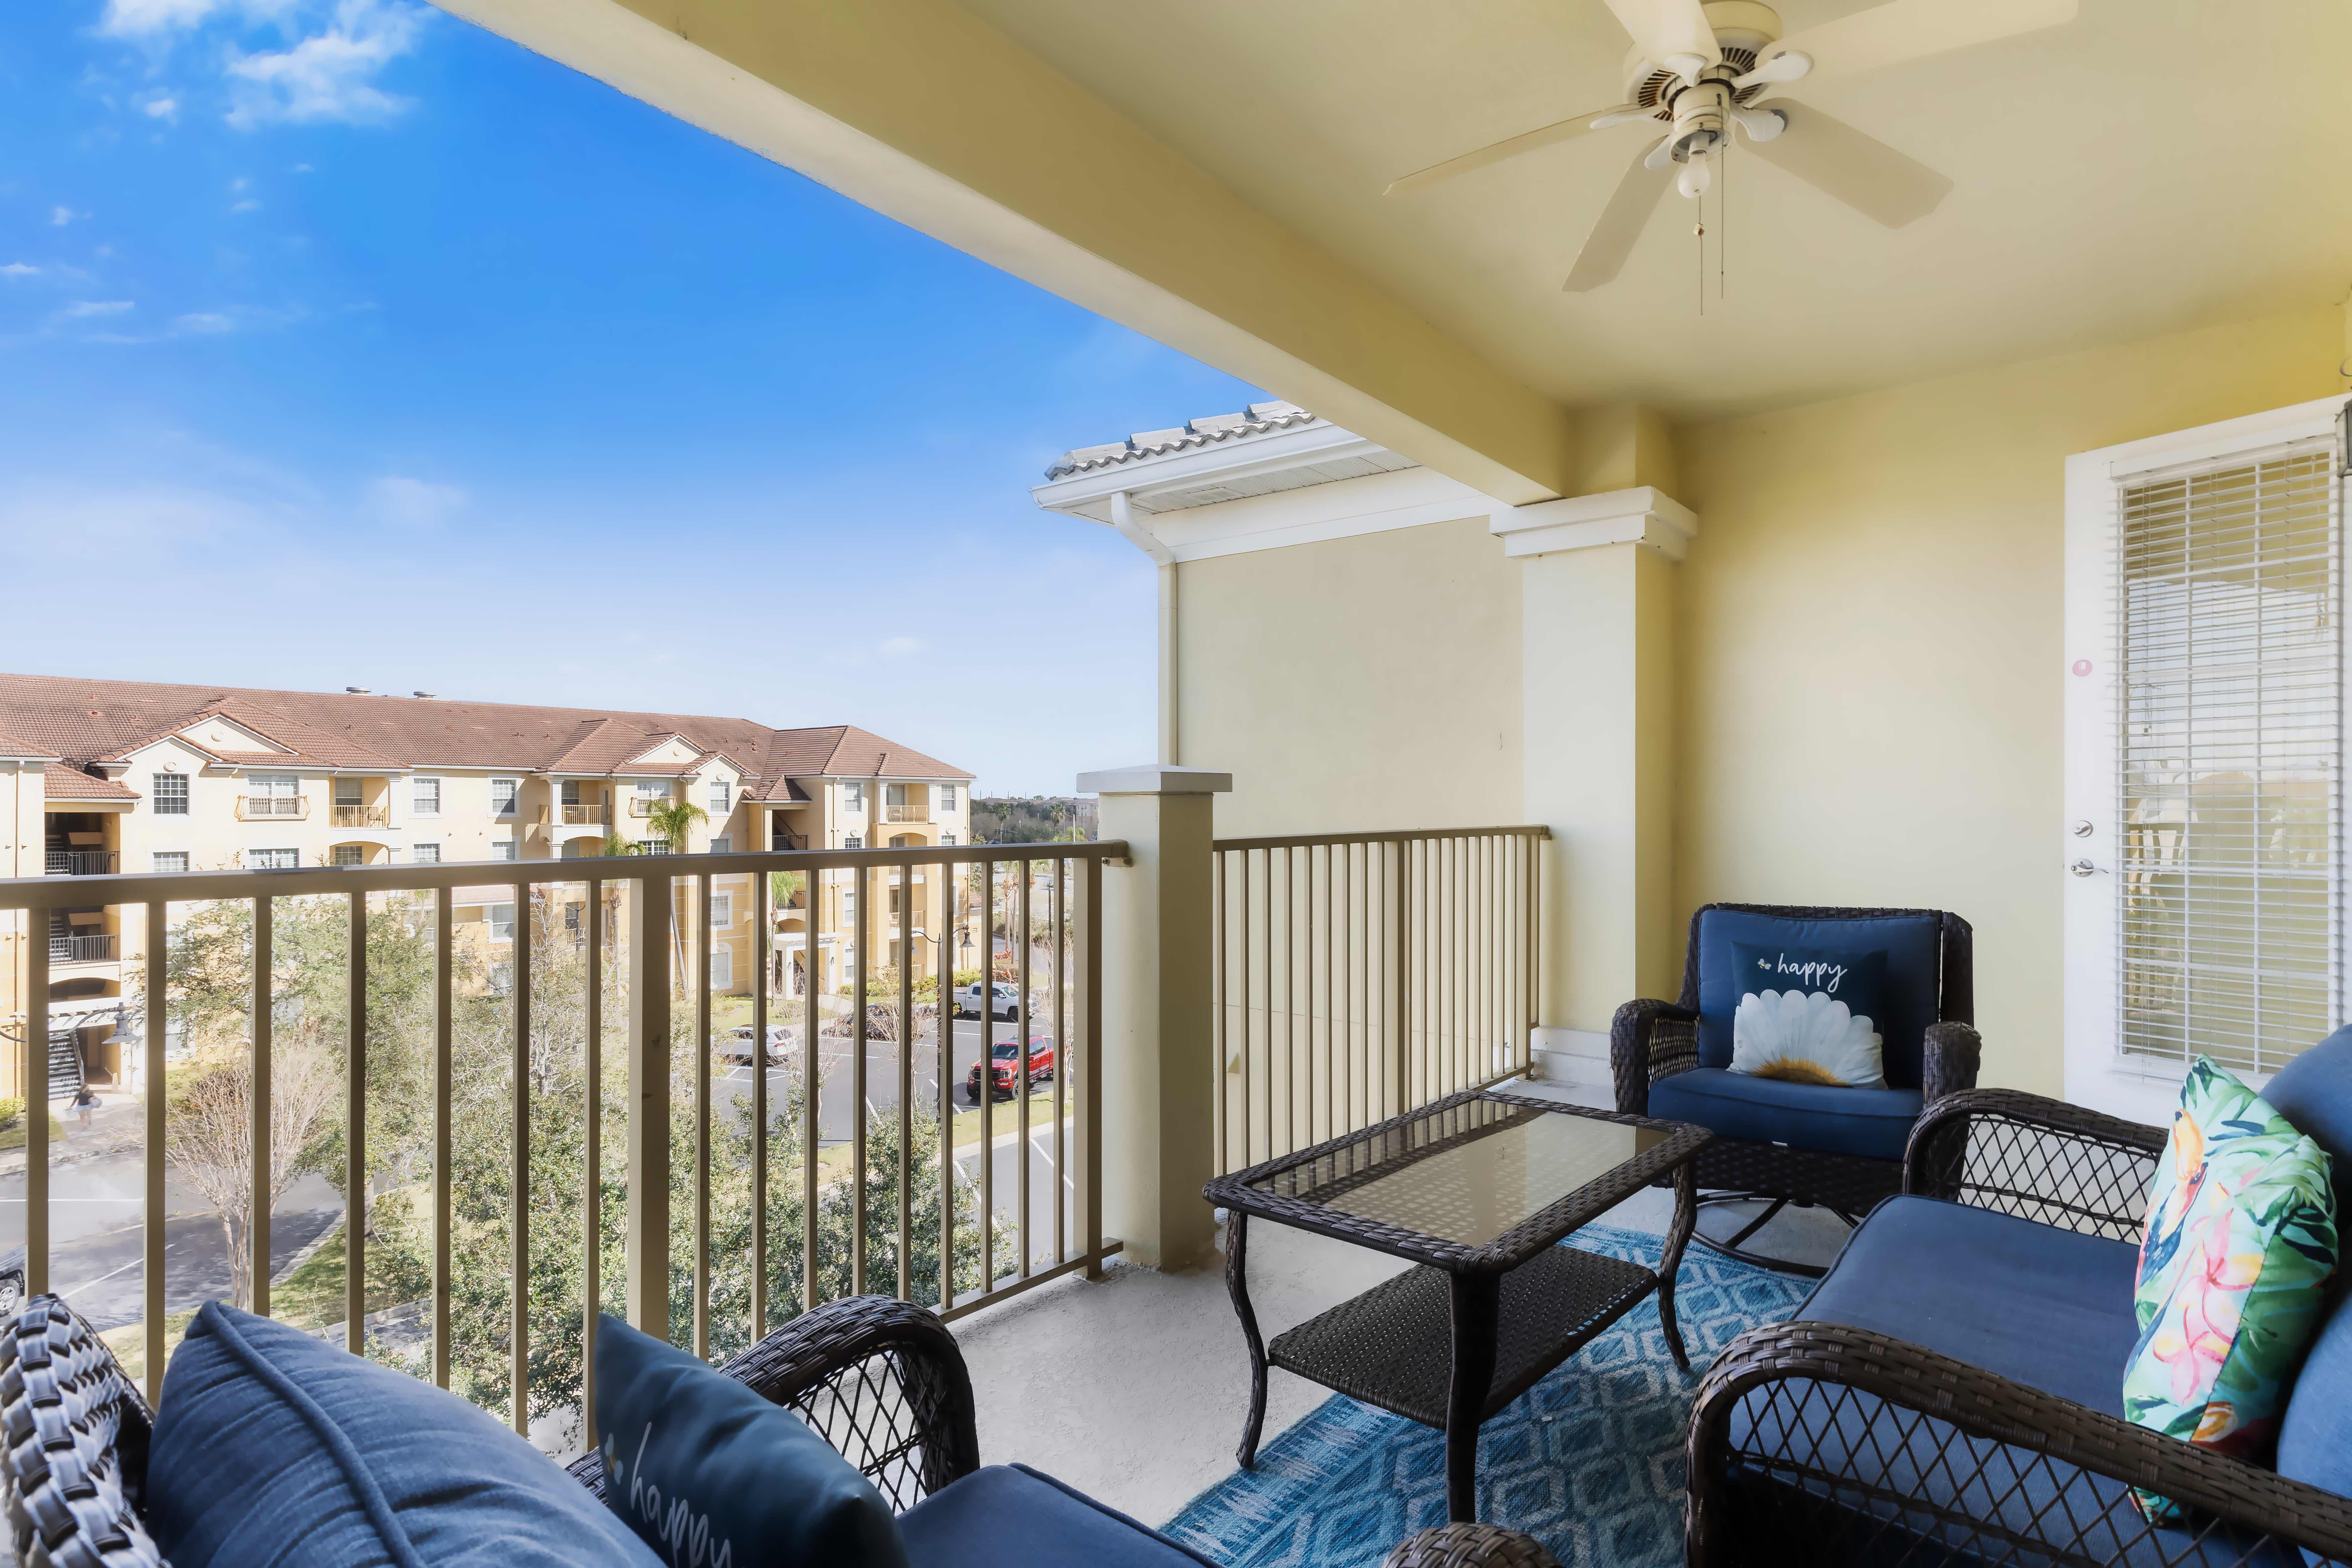 This outdoor view boasts a harmonious blend of relaxation and entertainment, featuring inviting seating areas that adds to the tranquil ambiance.